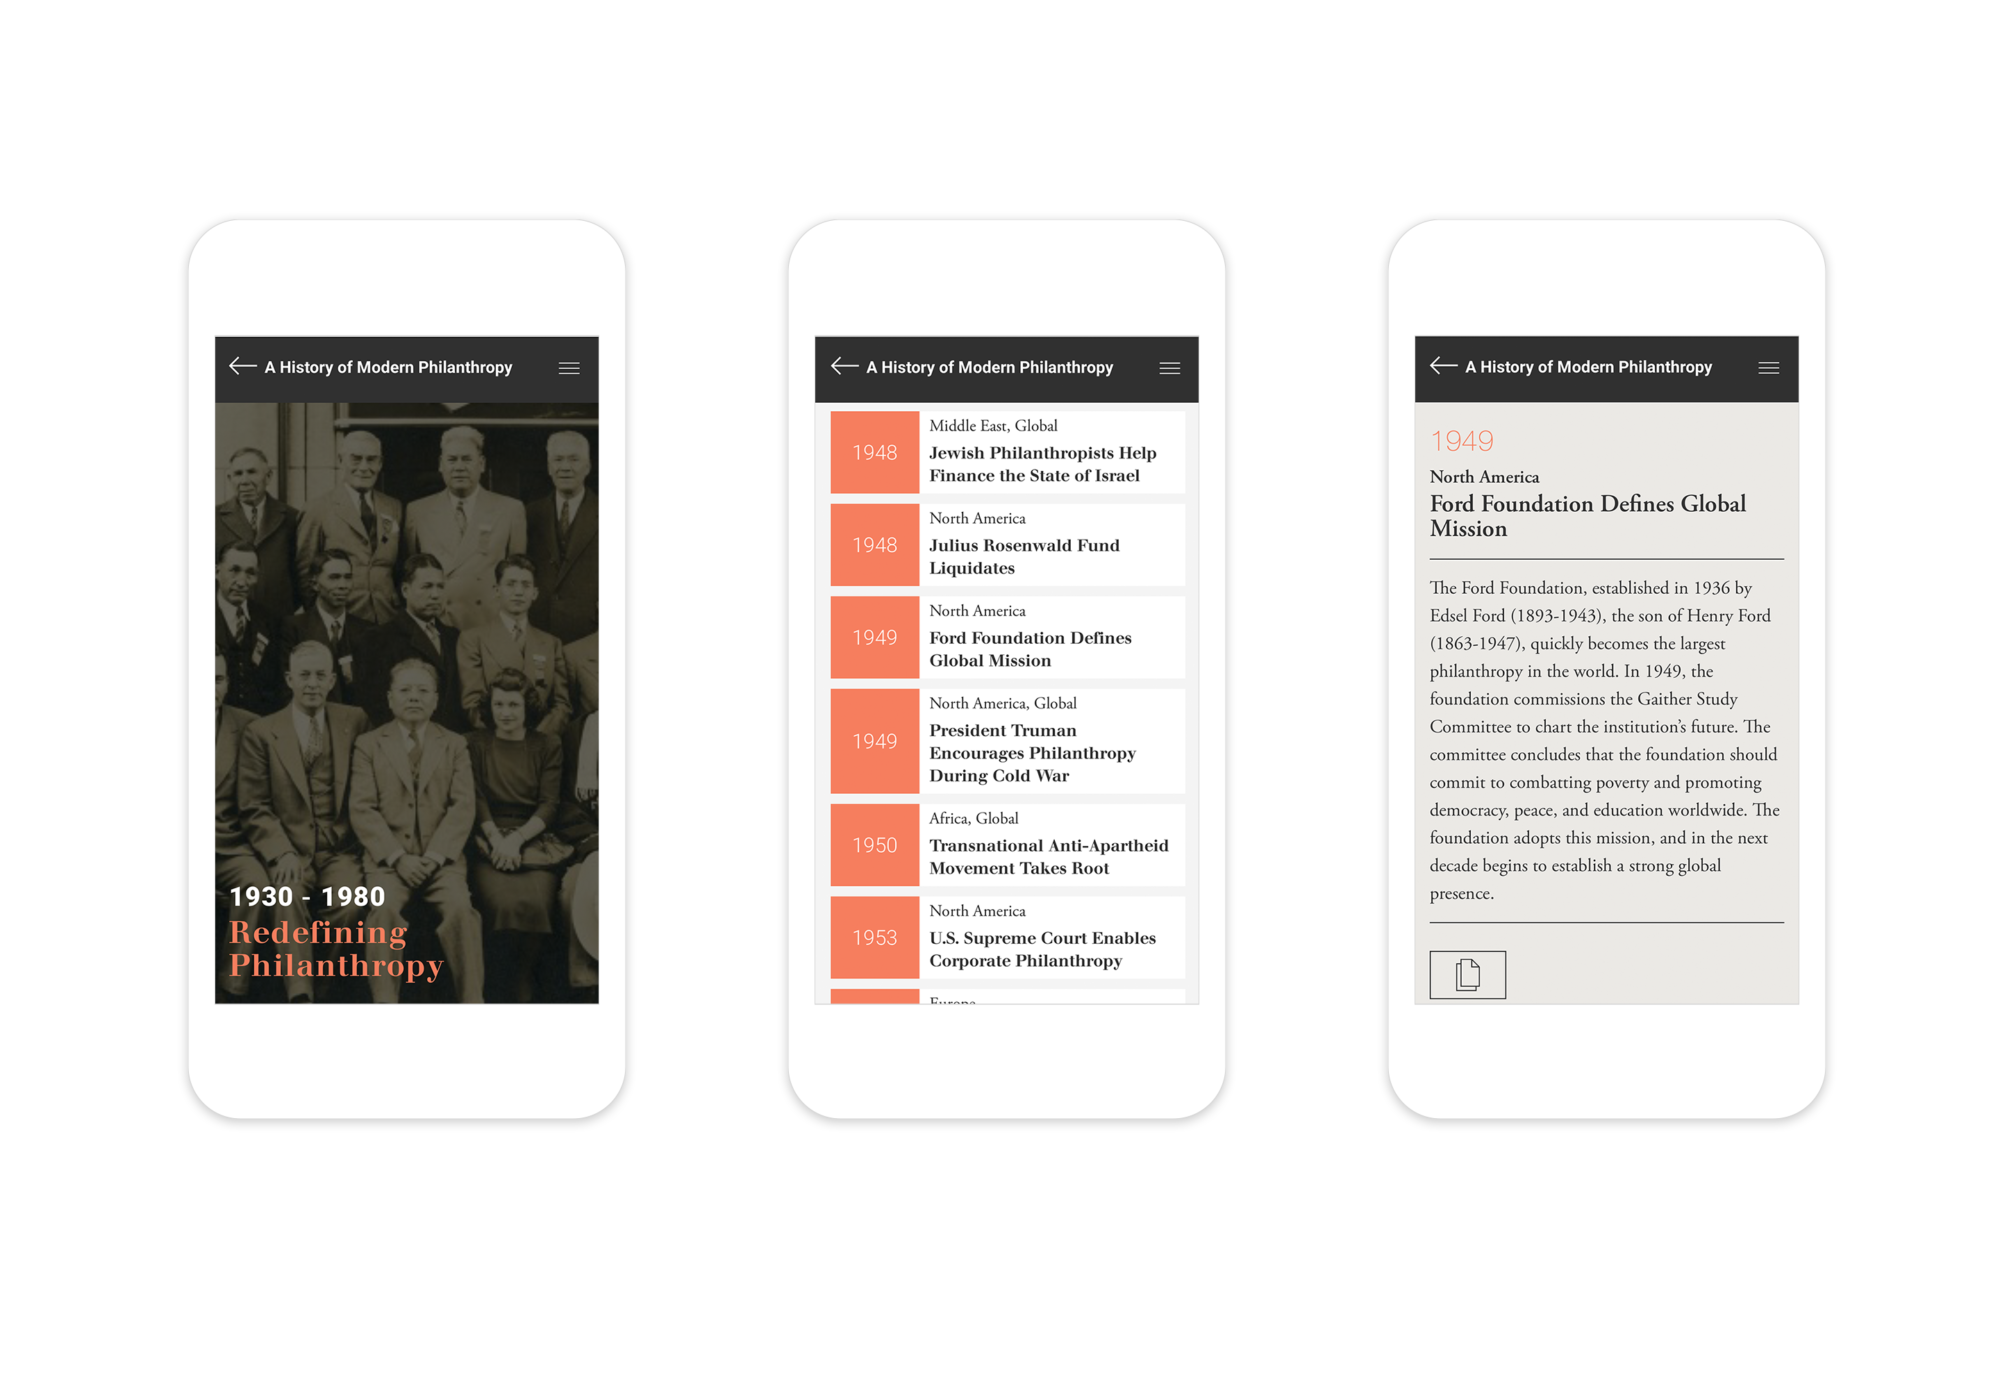 3 responsive mobile page designs: intro to the Modern Philanthropy era (1930-1980), interactive timeline, and a detailed timeline entry